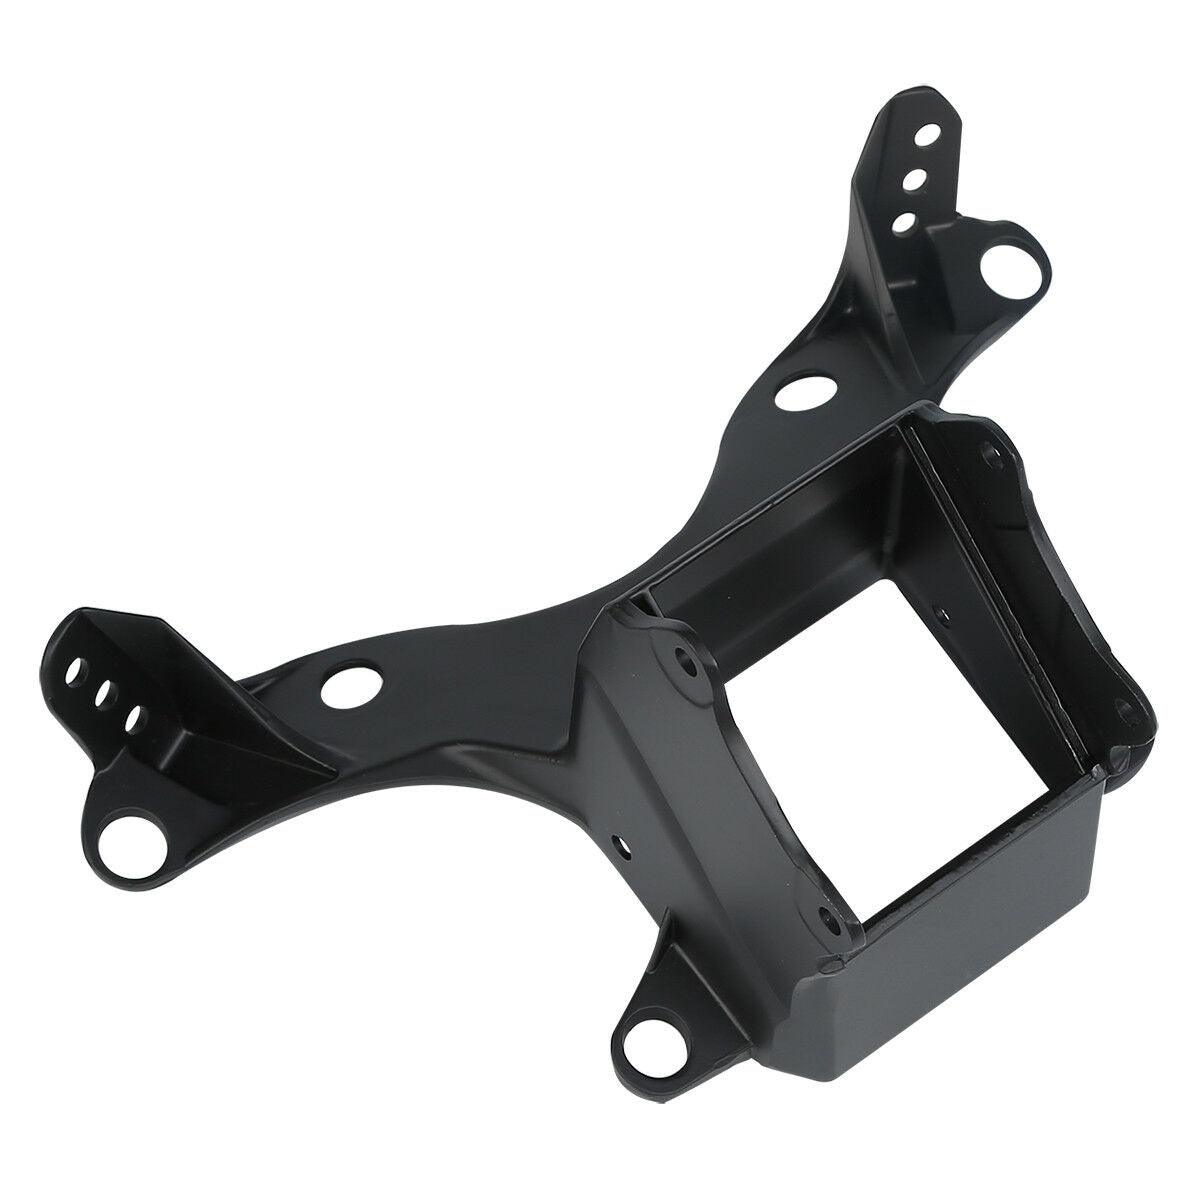 Fit For Yamaha YZF R6 2006-2007 Upper Stay Fairing cowling Headlight Bracket - Moto Life Products